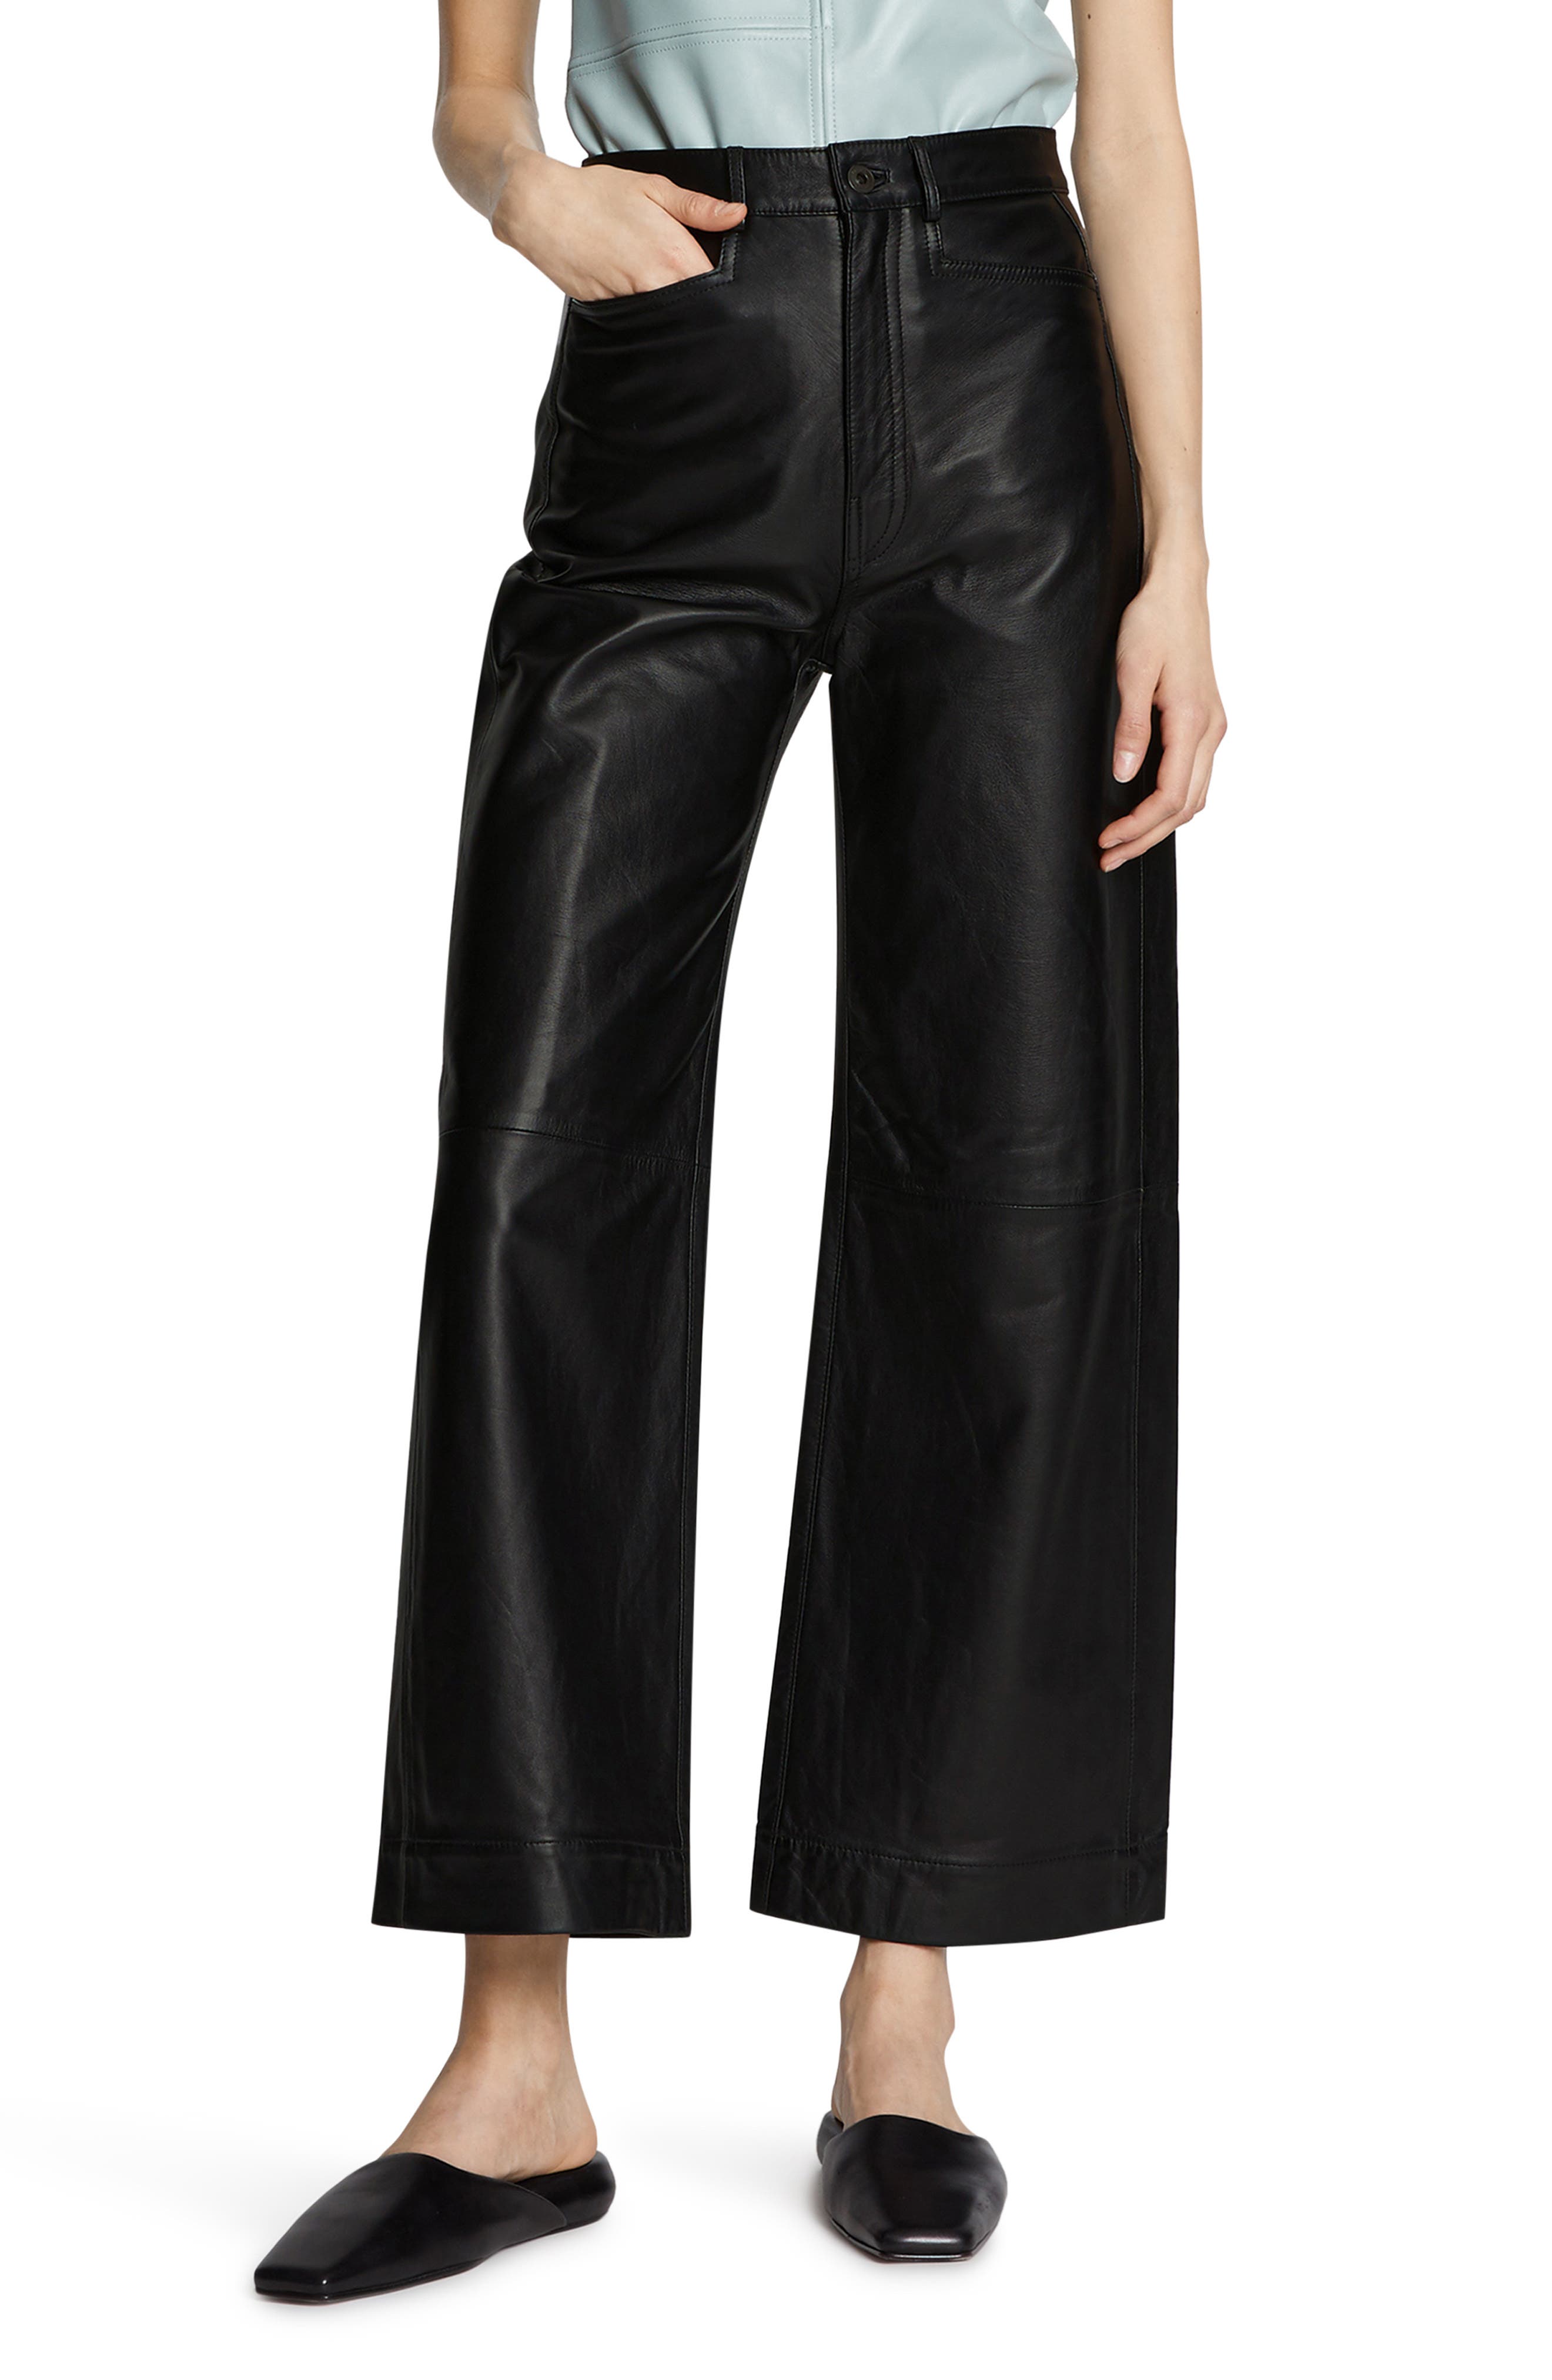 Women Genuine Lambskin Flared Pants Real Leather Flare Trousers Black Bottoms 